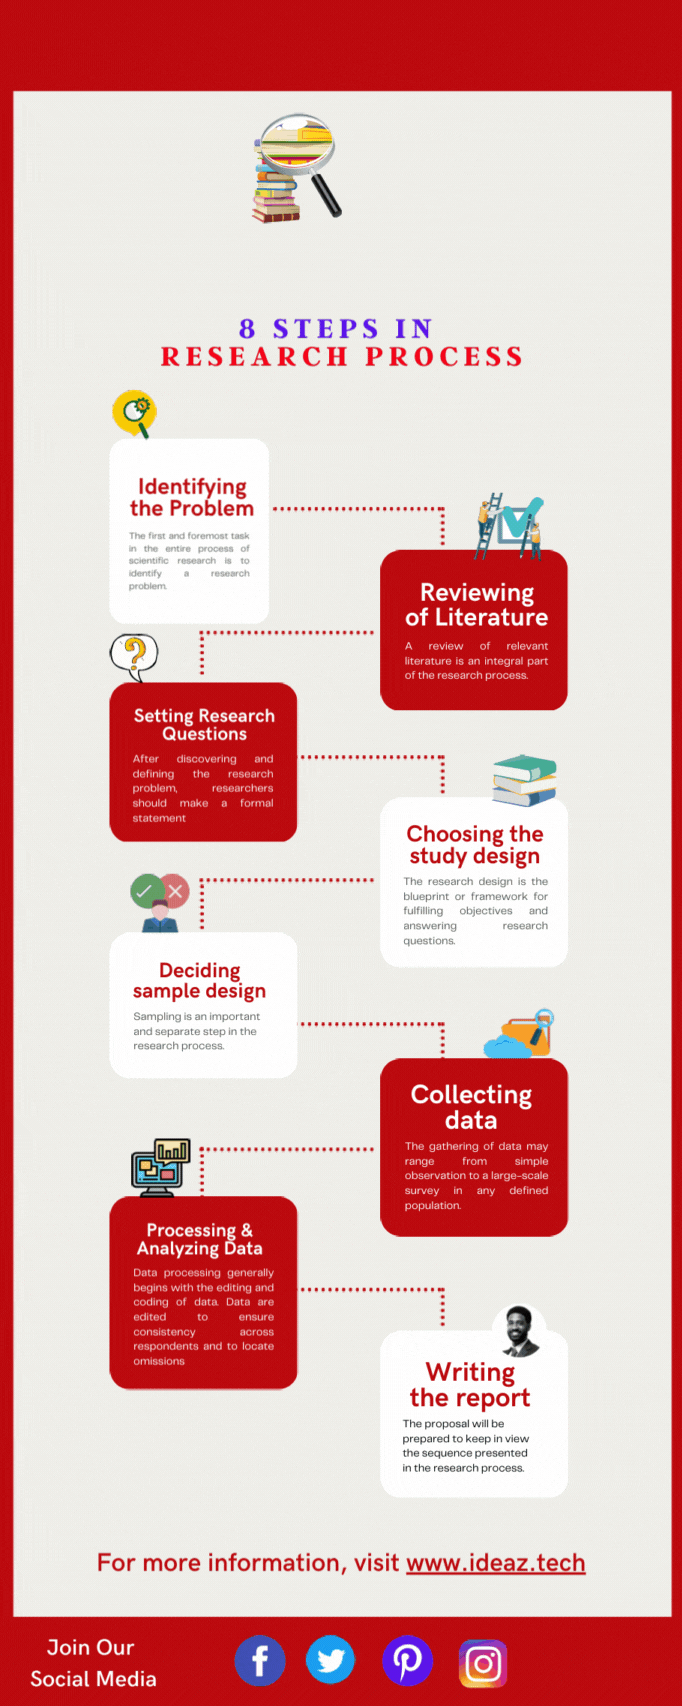 Research Process: 8 Steps in Research Process Infographic